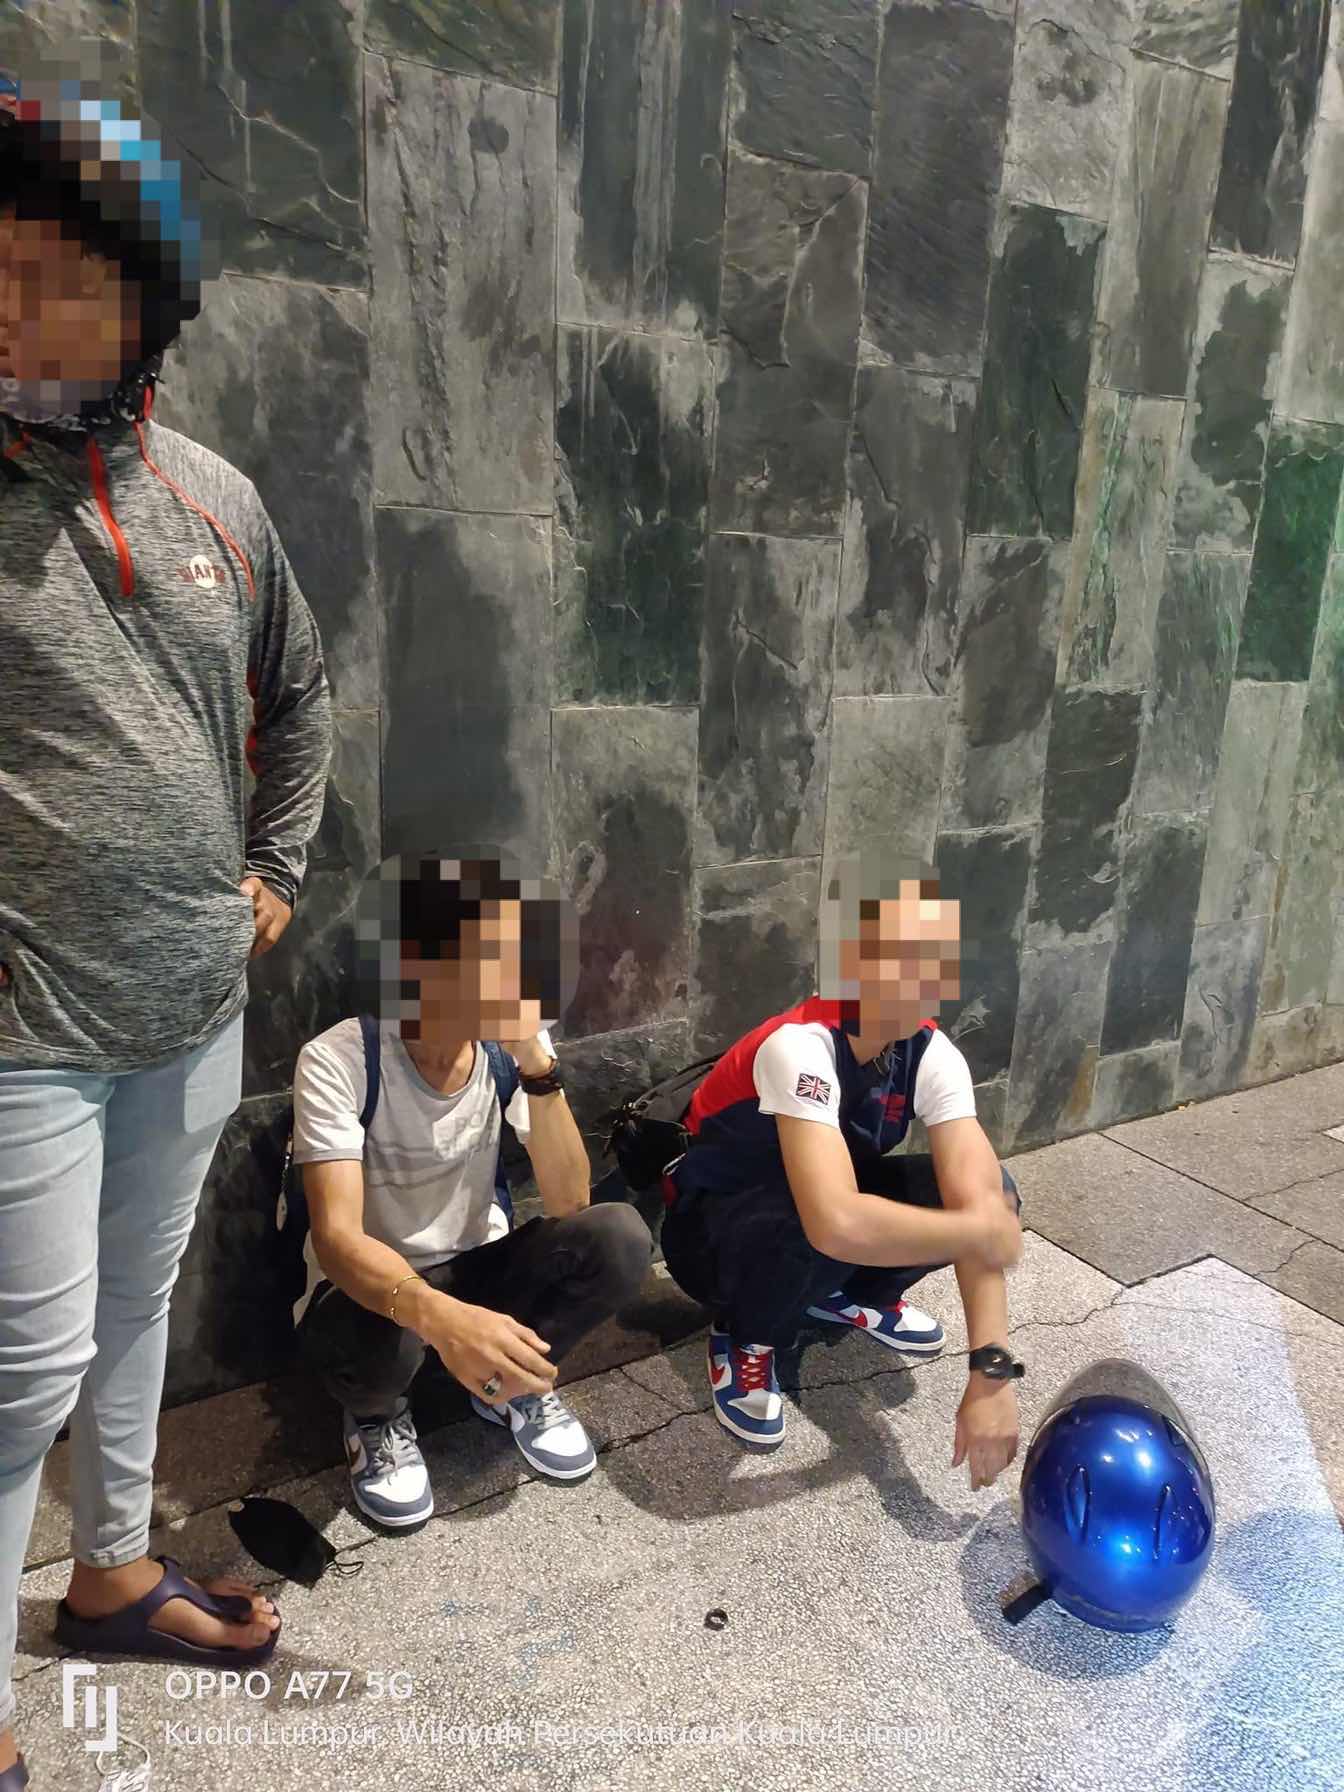 [video] woman gets robbed by 2 snatch thieves in kl, rescued by group of m'sians